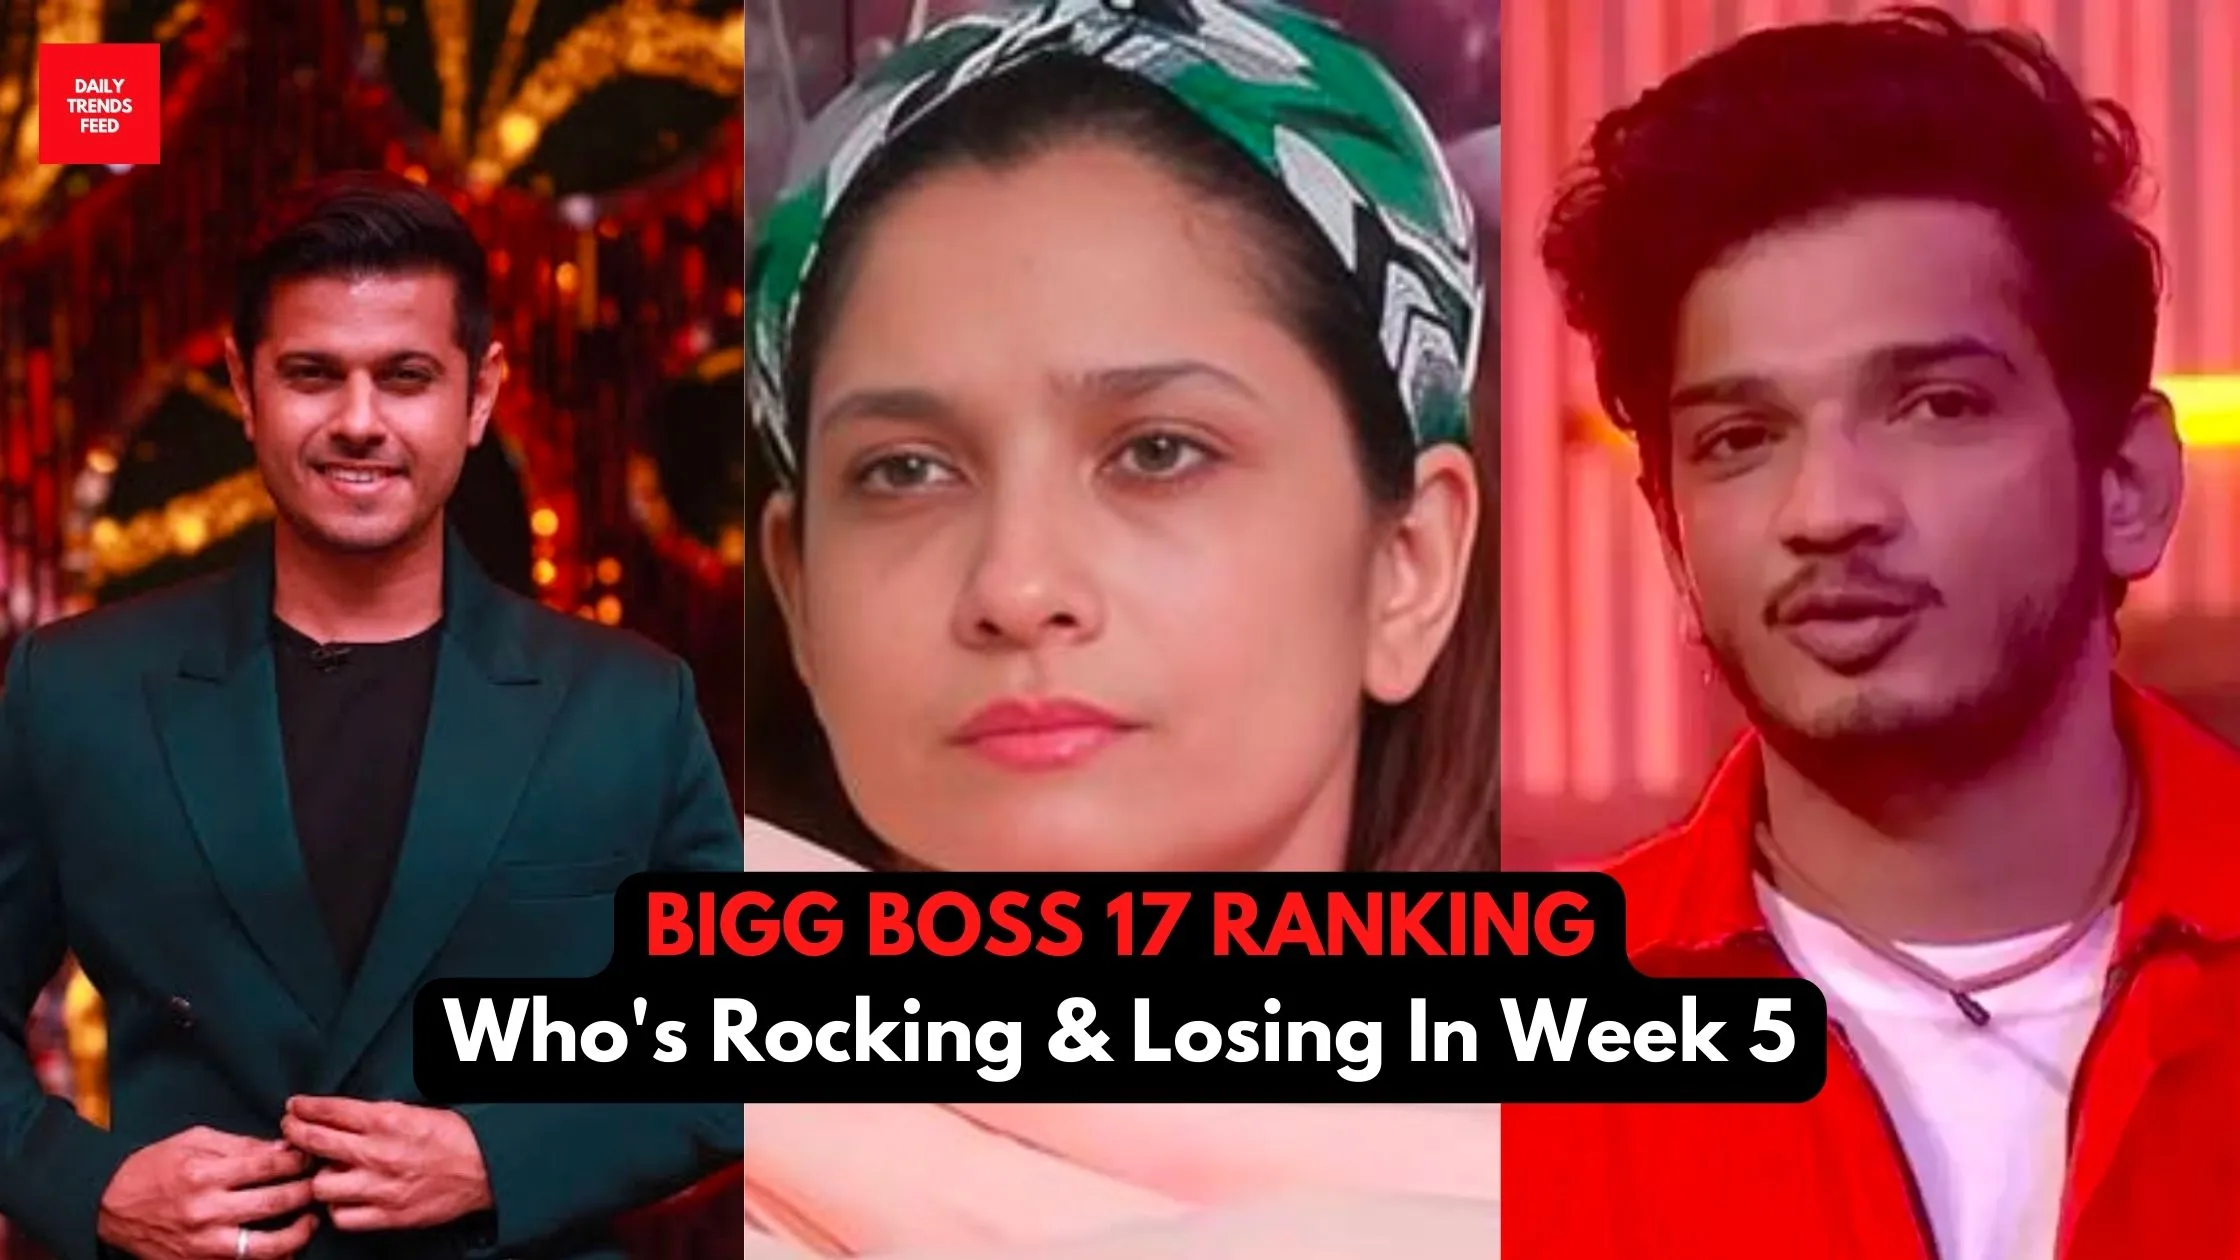 Bigg Boss 17 Ranking: Check Out Who's Rocking & Losing In Week 5!